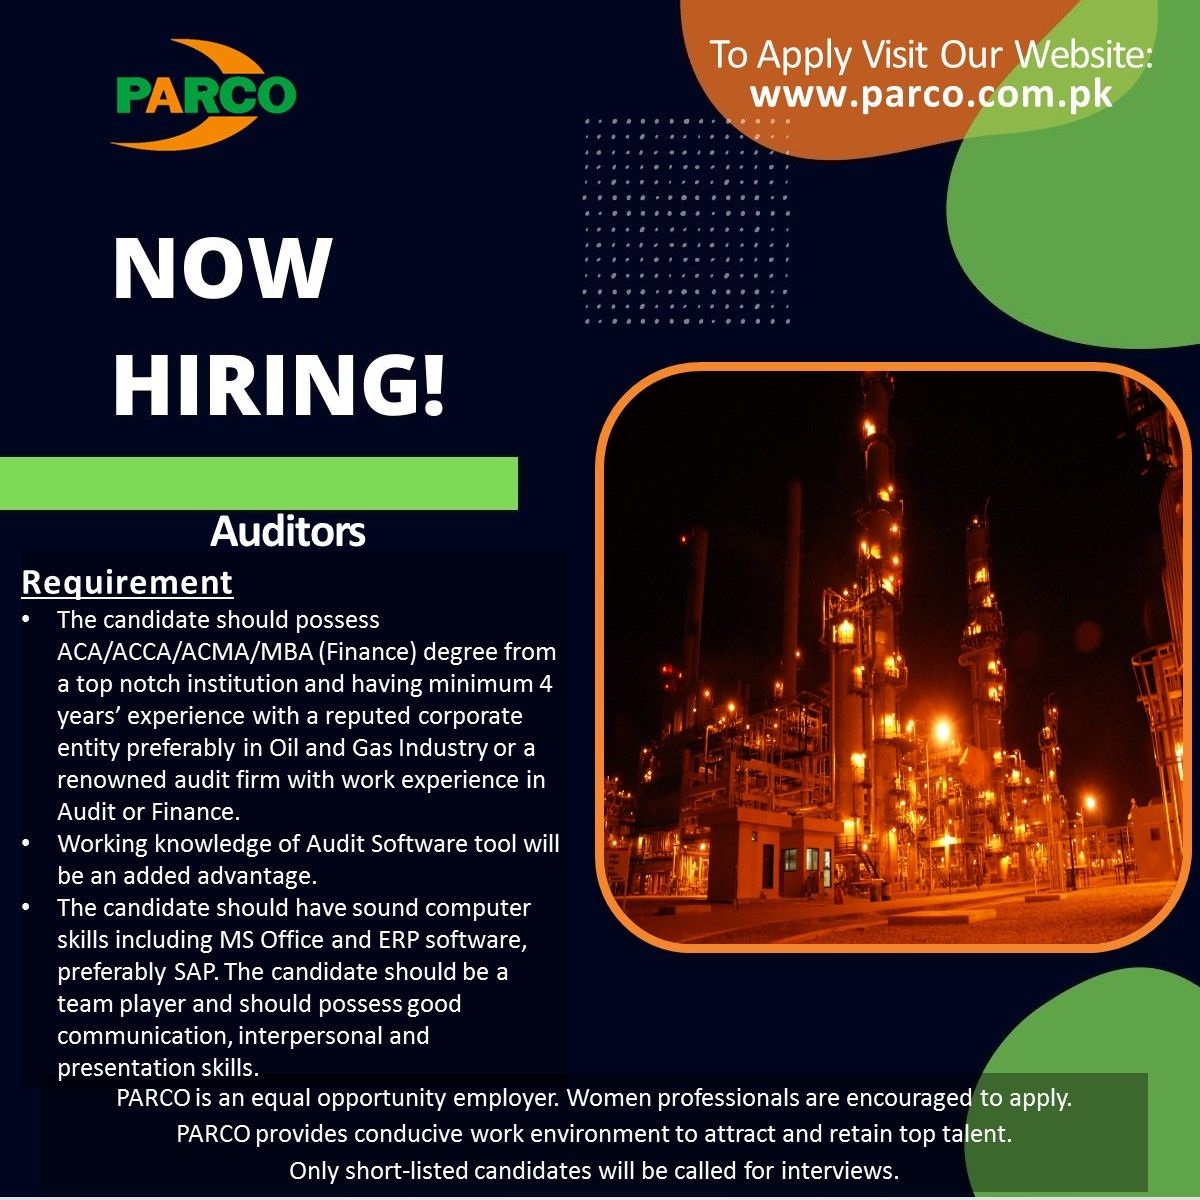 PARCO - Pak-Arab Refinery Limited is hiring Auditors